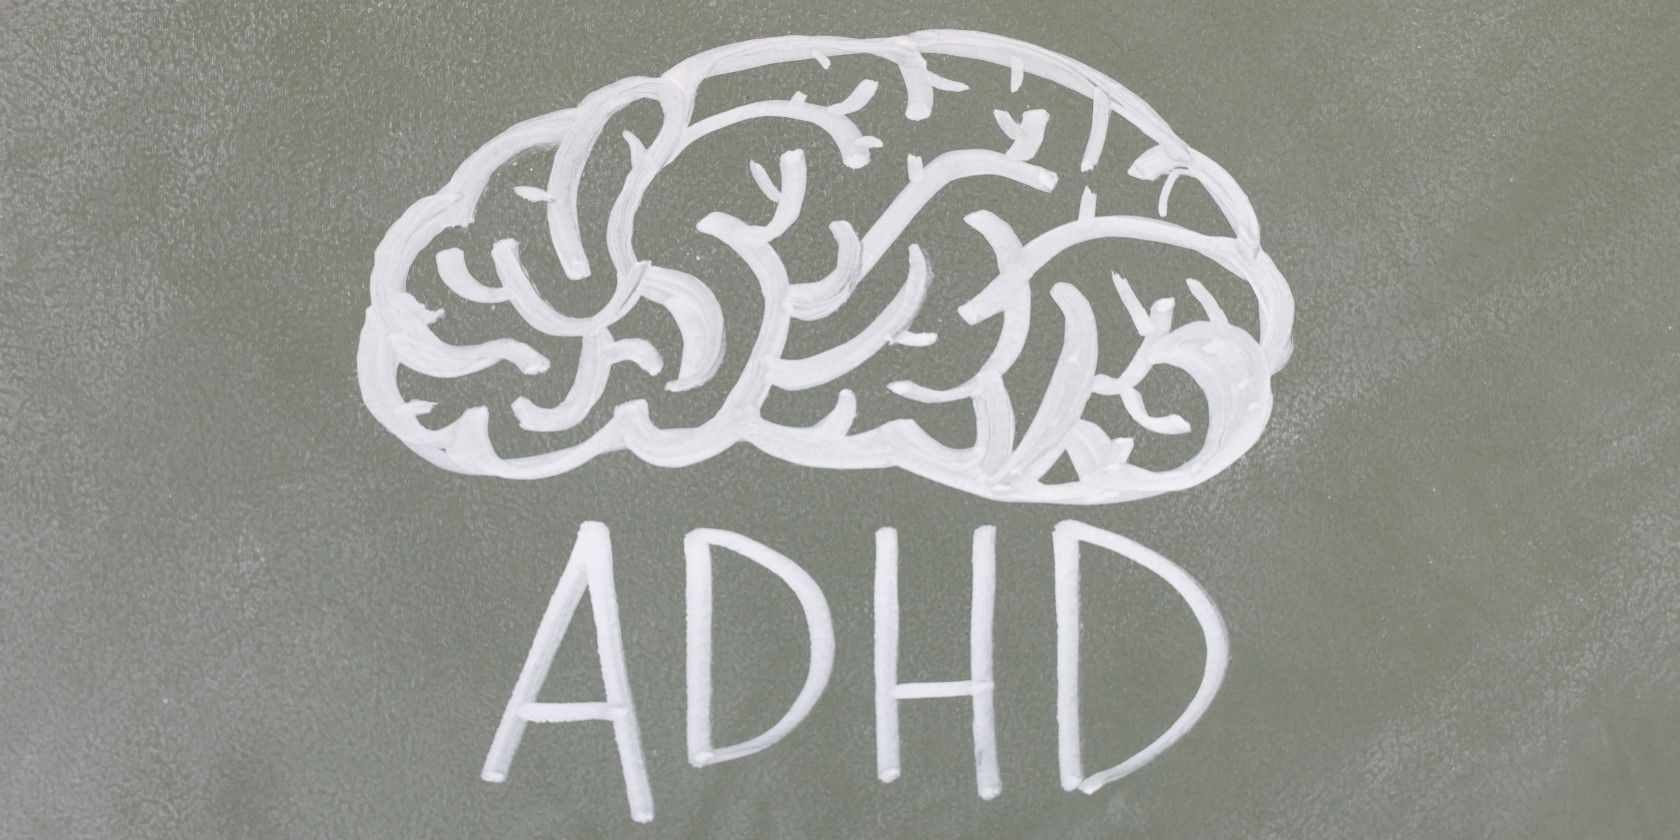 Human brain and the letters ADHD drawn on chalkboard